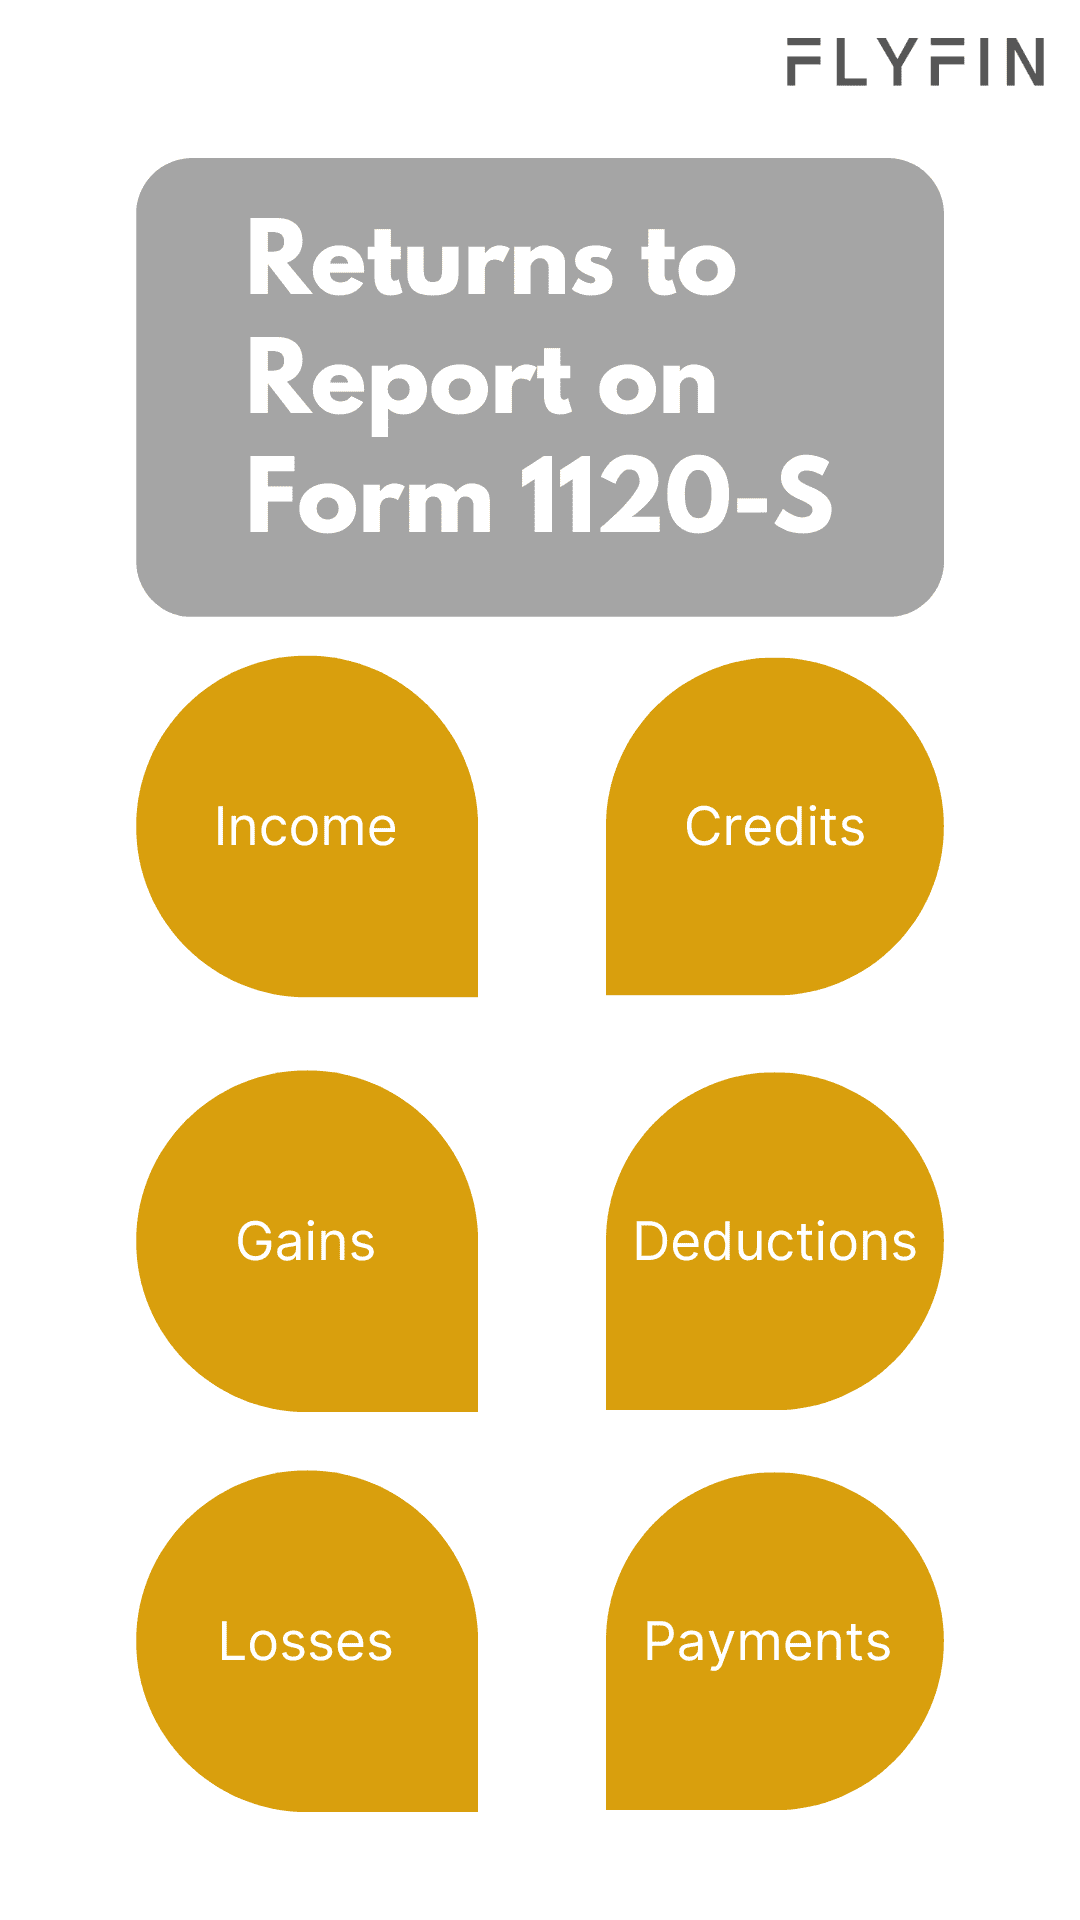 Flyfin returns to report on Form 1120-S for income, gains, losses, credits, deductions, and payments. Relevant for self-employed, freelancers, and taxes.